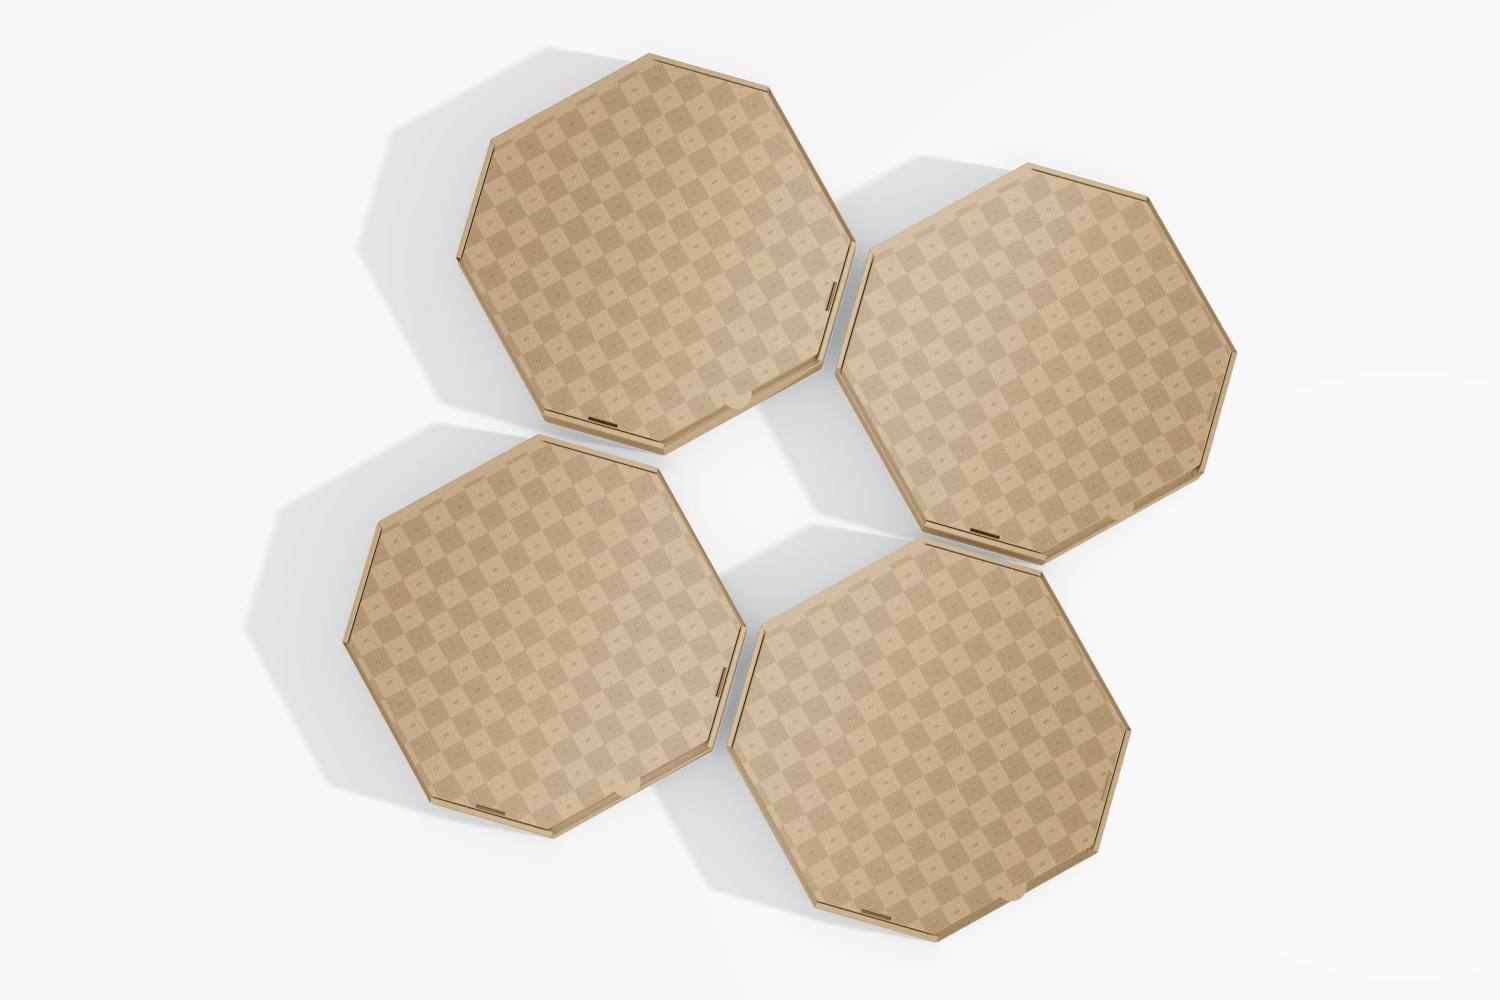 Octagonal Mailing Boxes Mockup, Top View